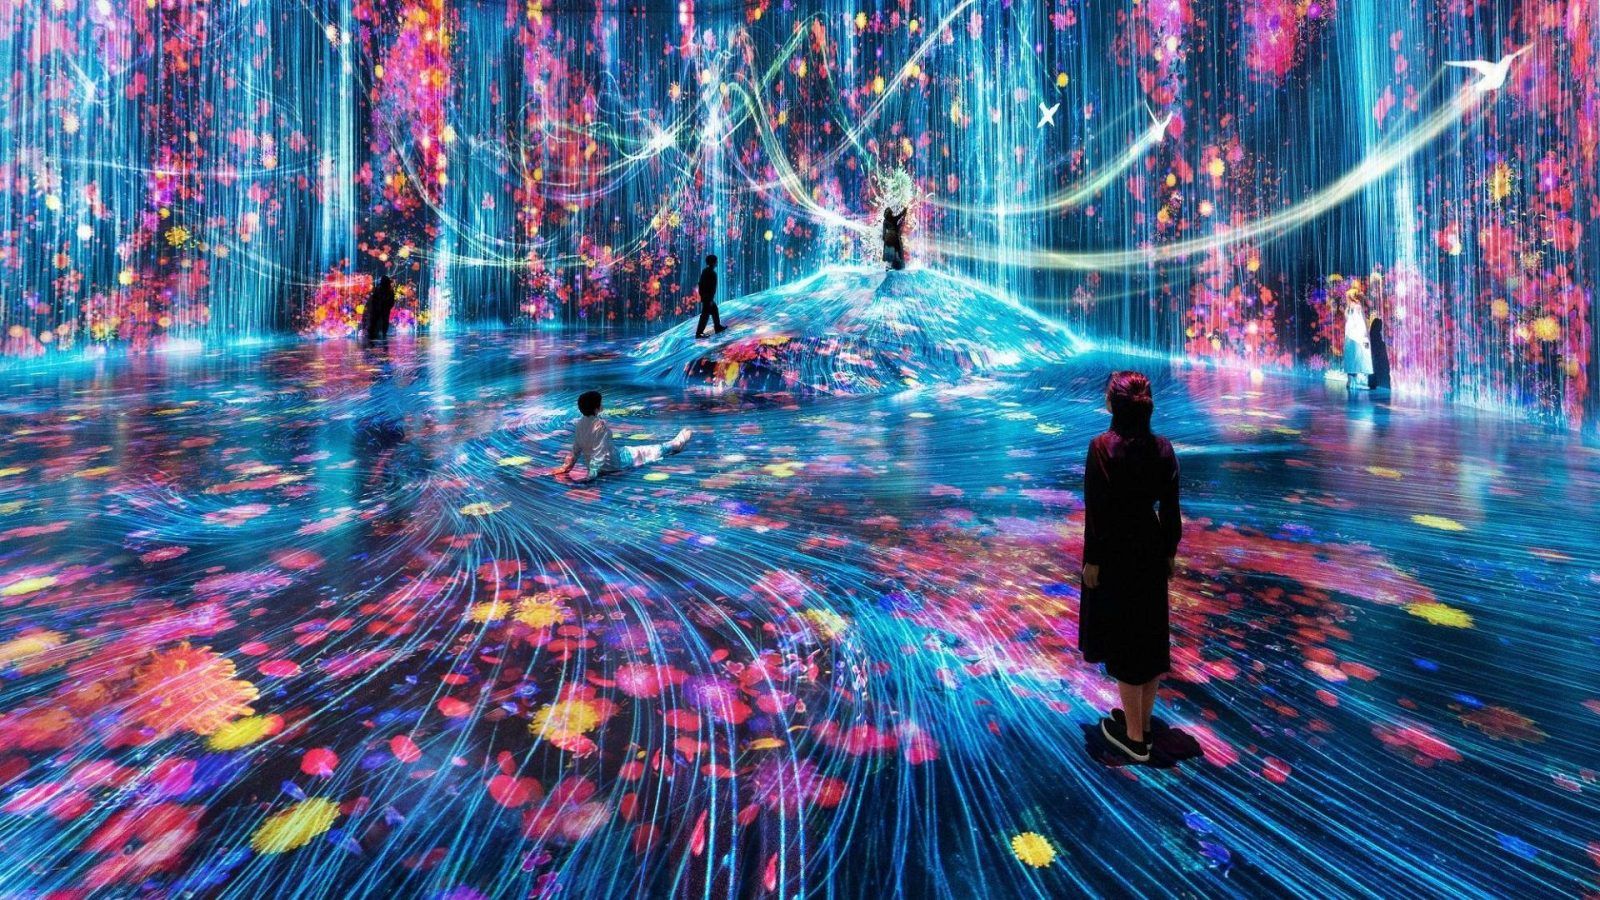 Without Borders In The Middle East: The teamLab Borderless Museum Comes To...